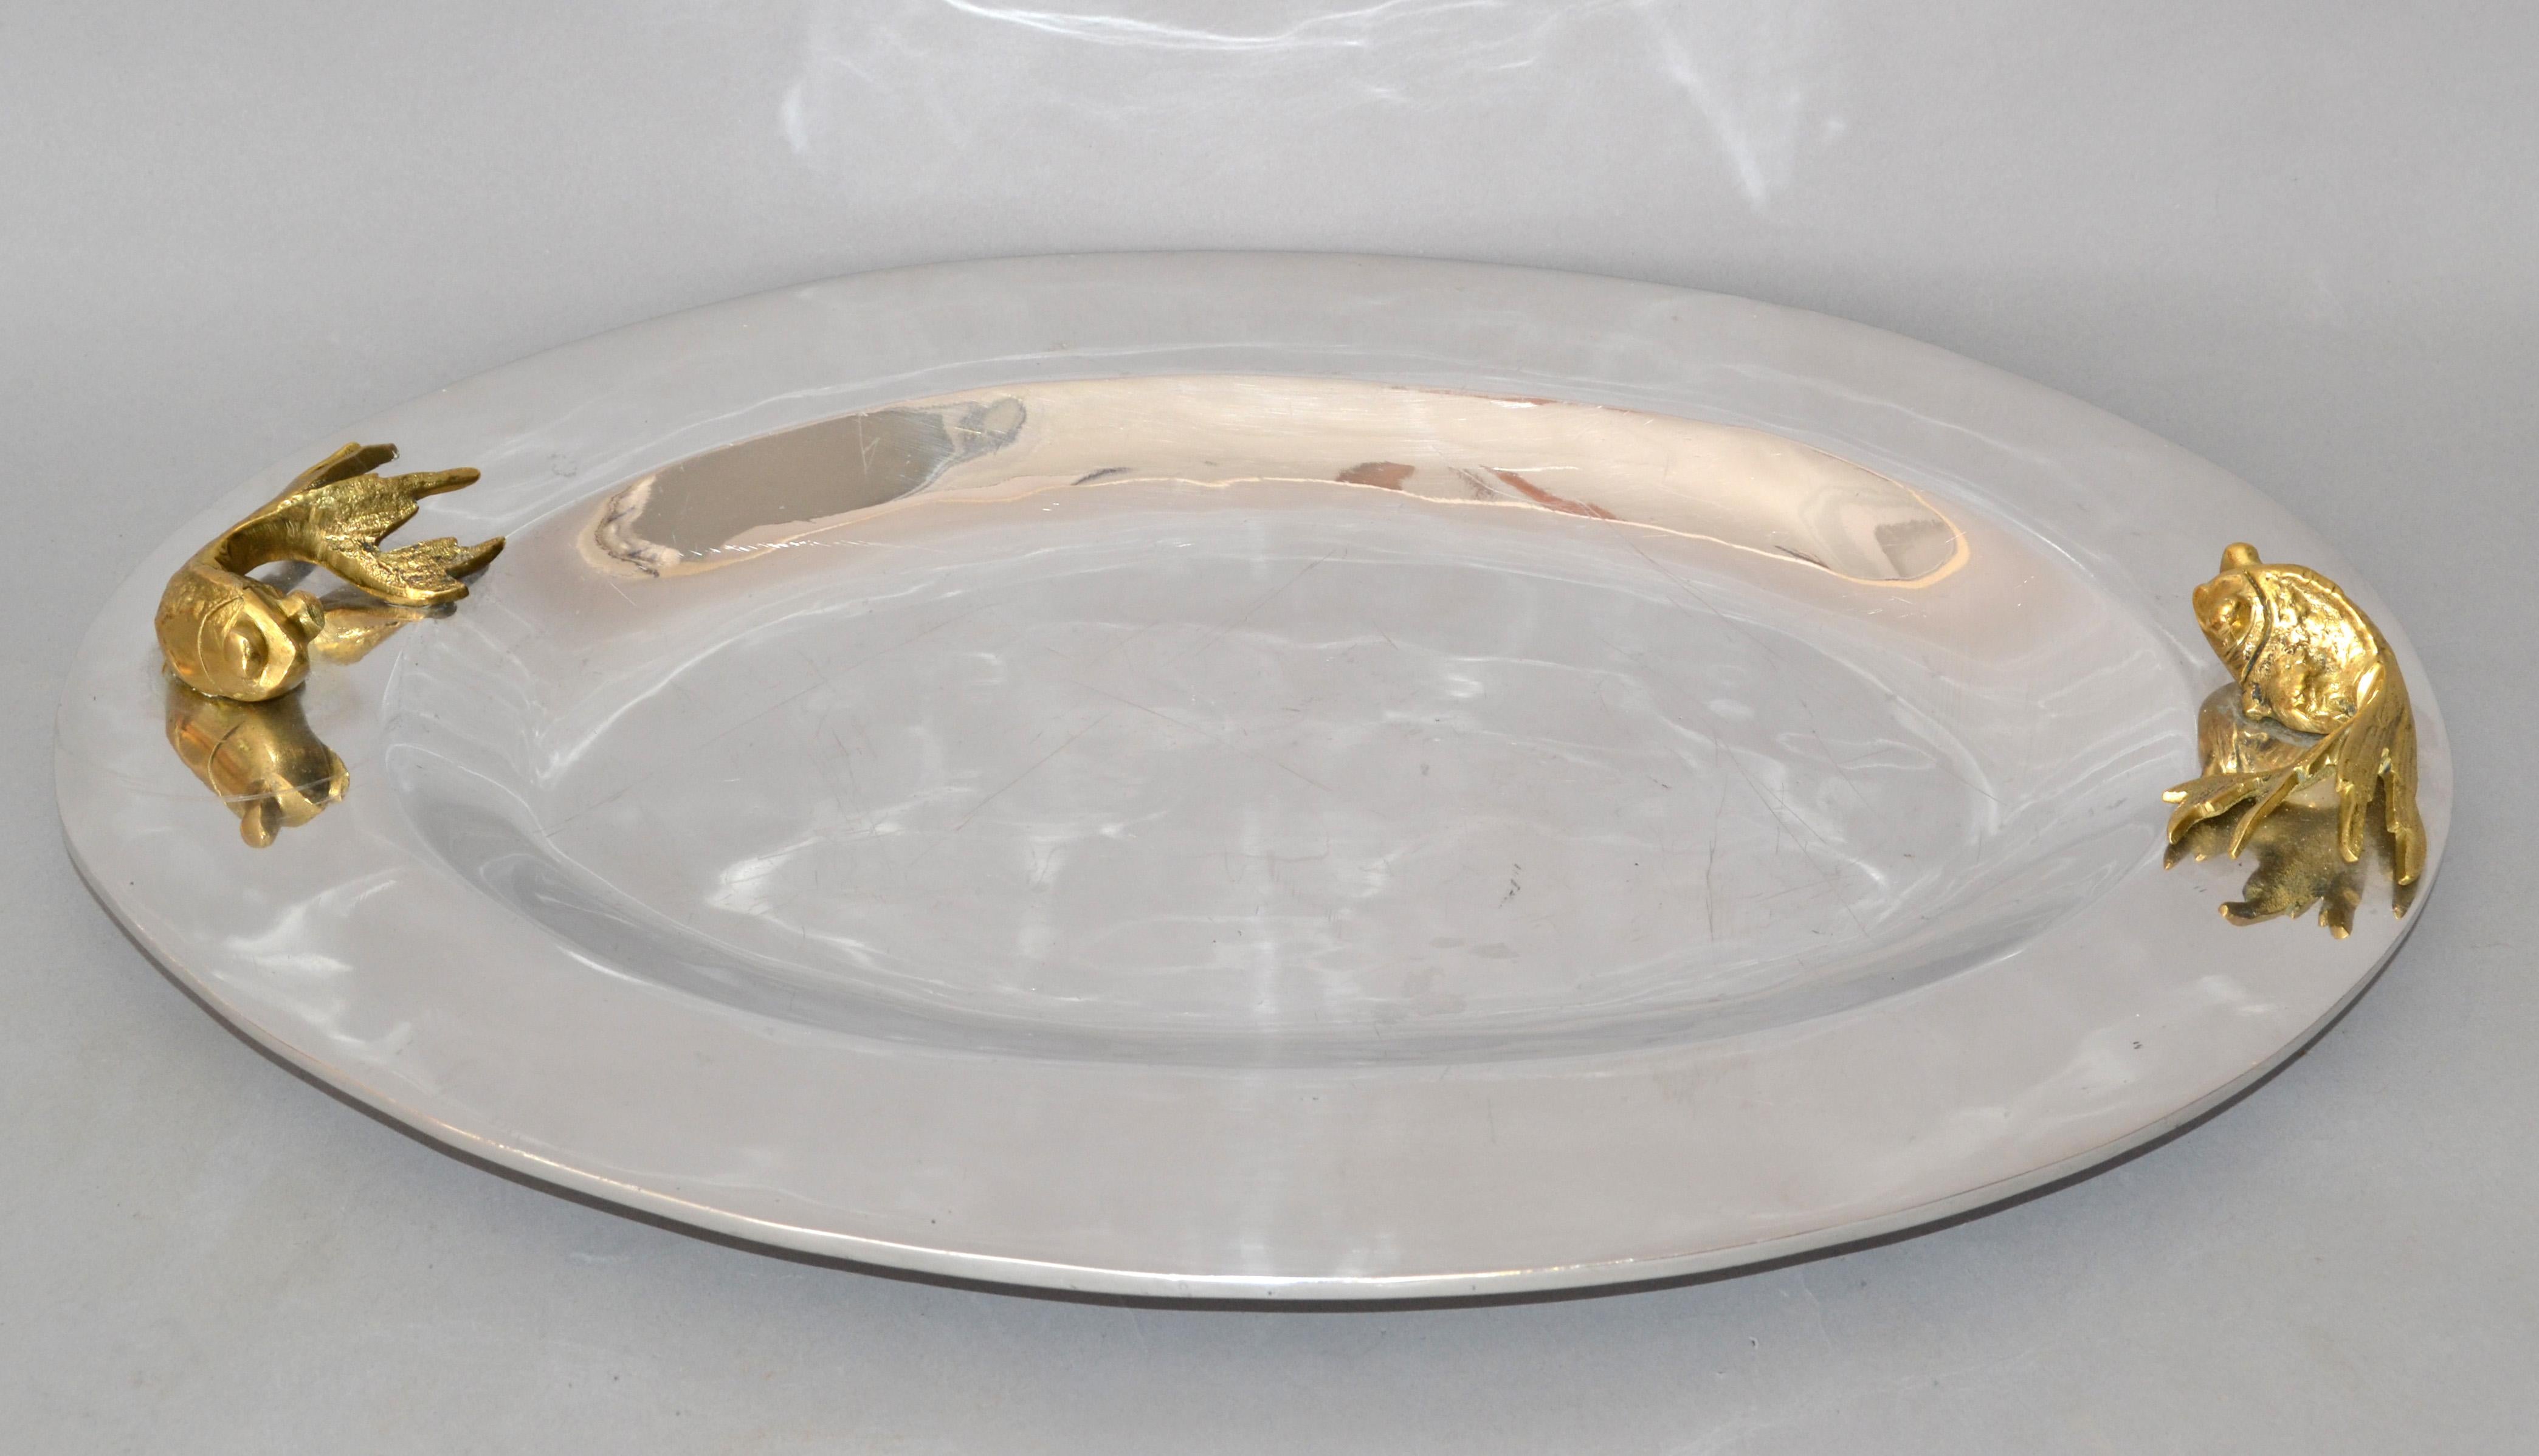 Marked decorative oval serving tray, Fish Platter, Serveware made out of polished chrome-plated metal with bronze Fish handles.
Stamped Made in Mexico on the Reverse.
Great Collector's item for Nautical Design Lovers.

